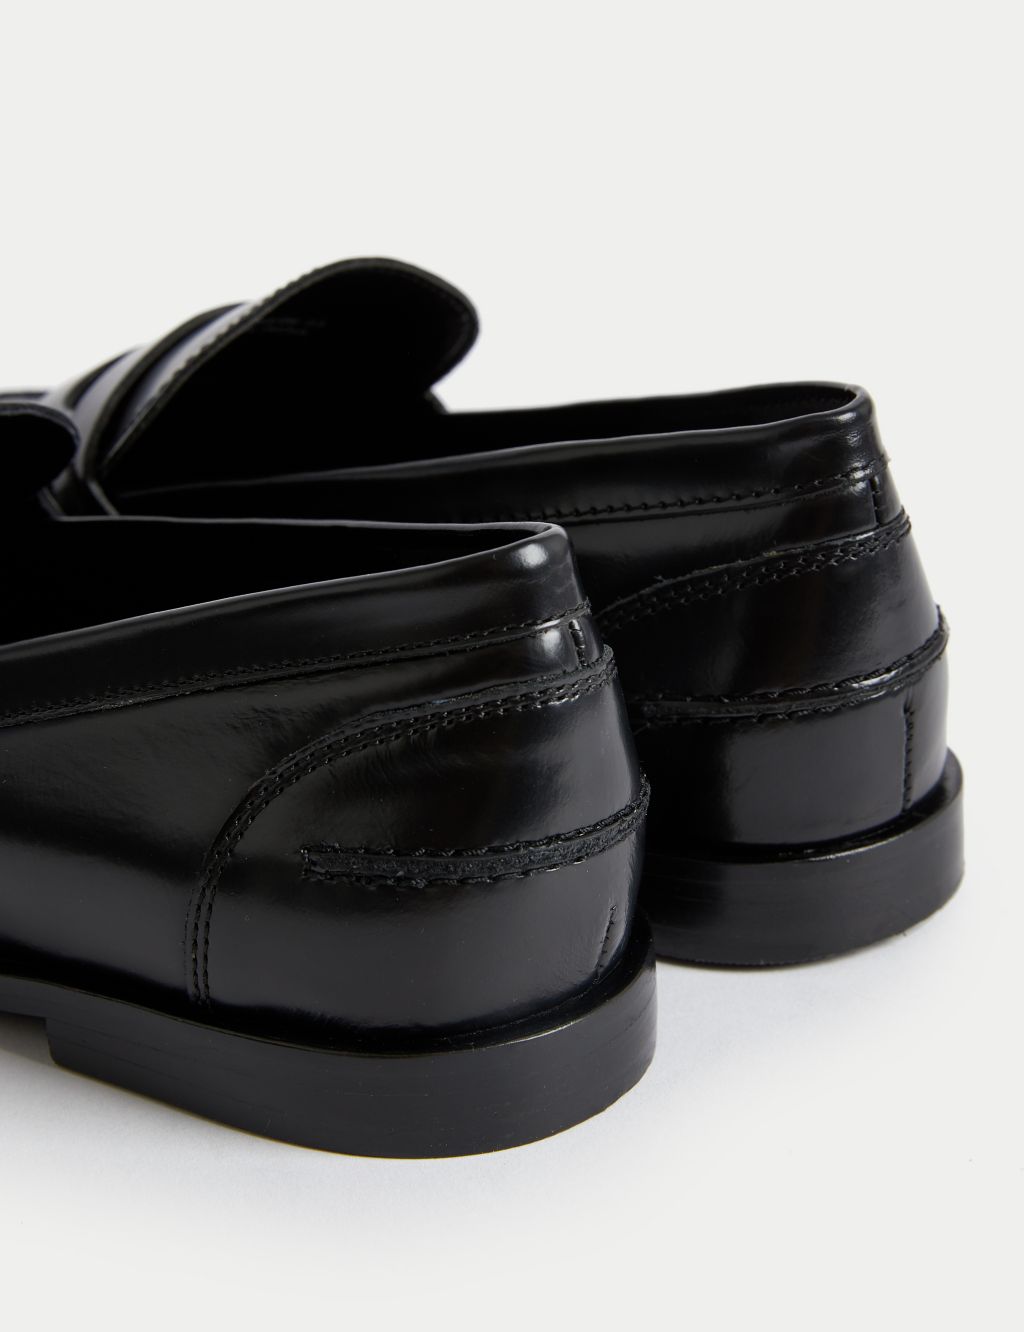 Leather Flat Square Toe Loafers image 3